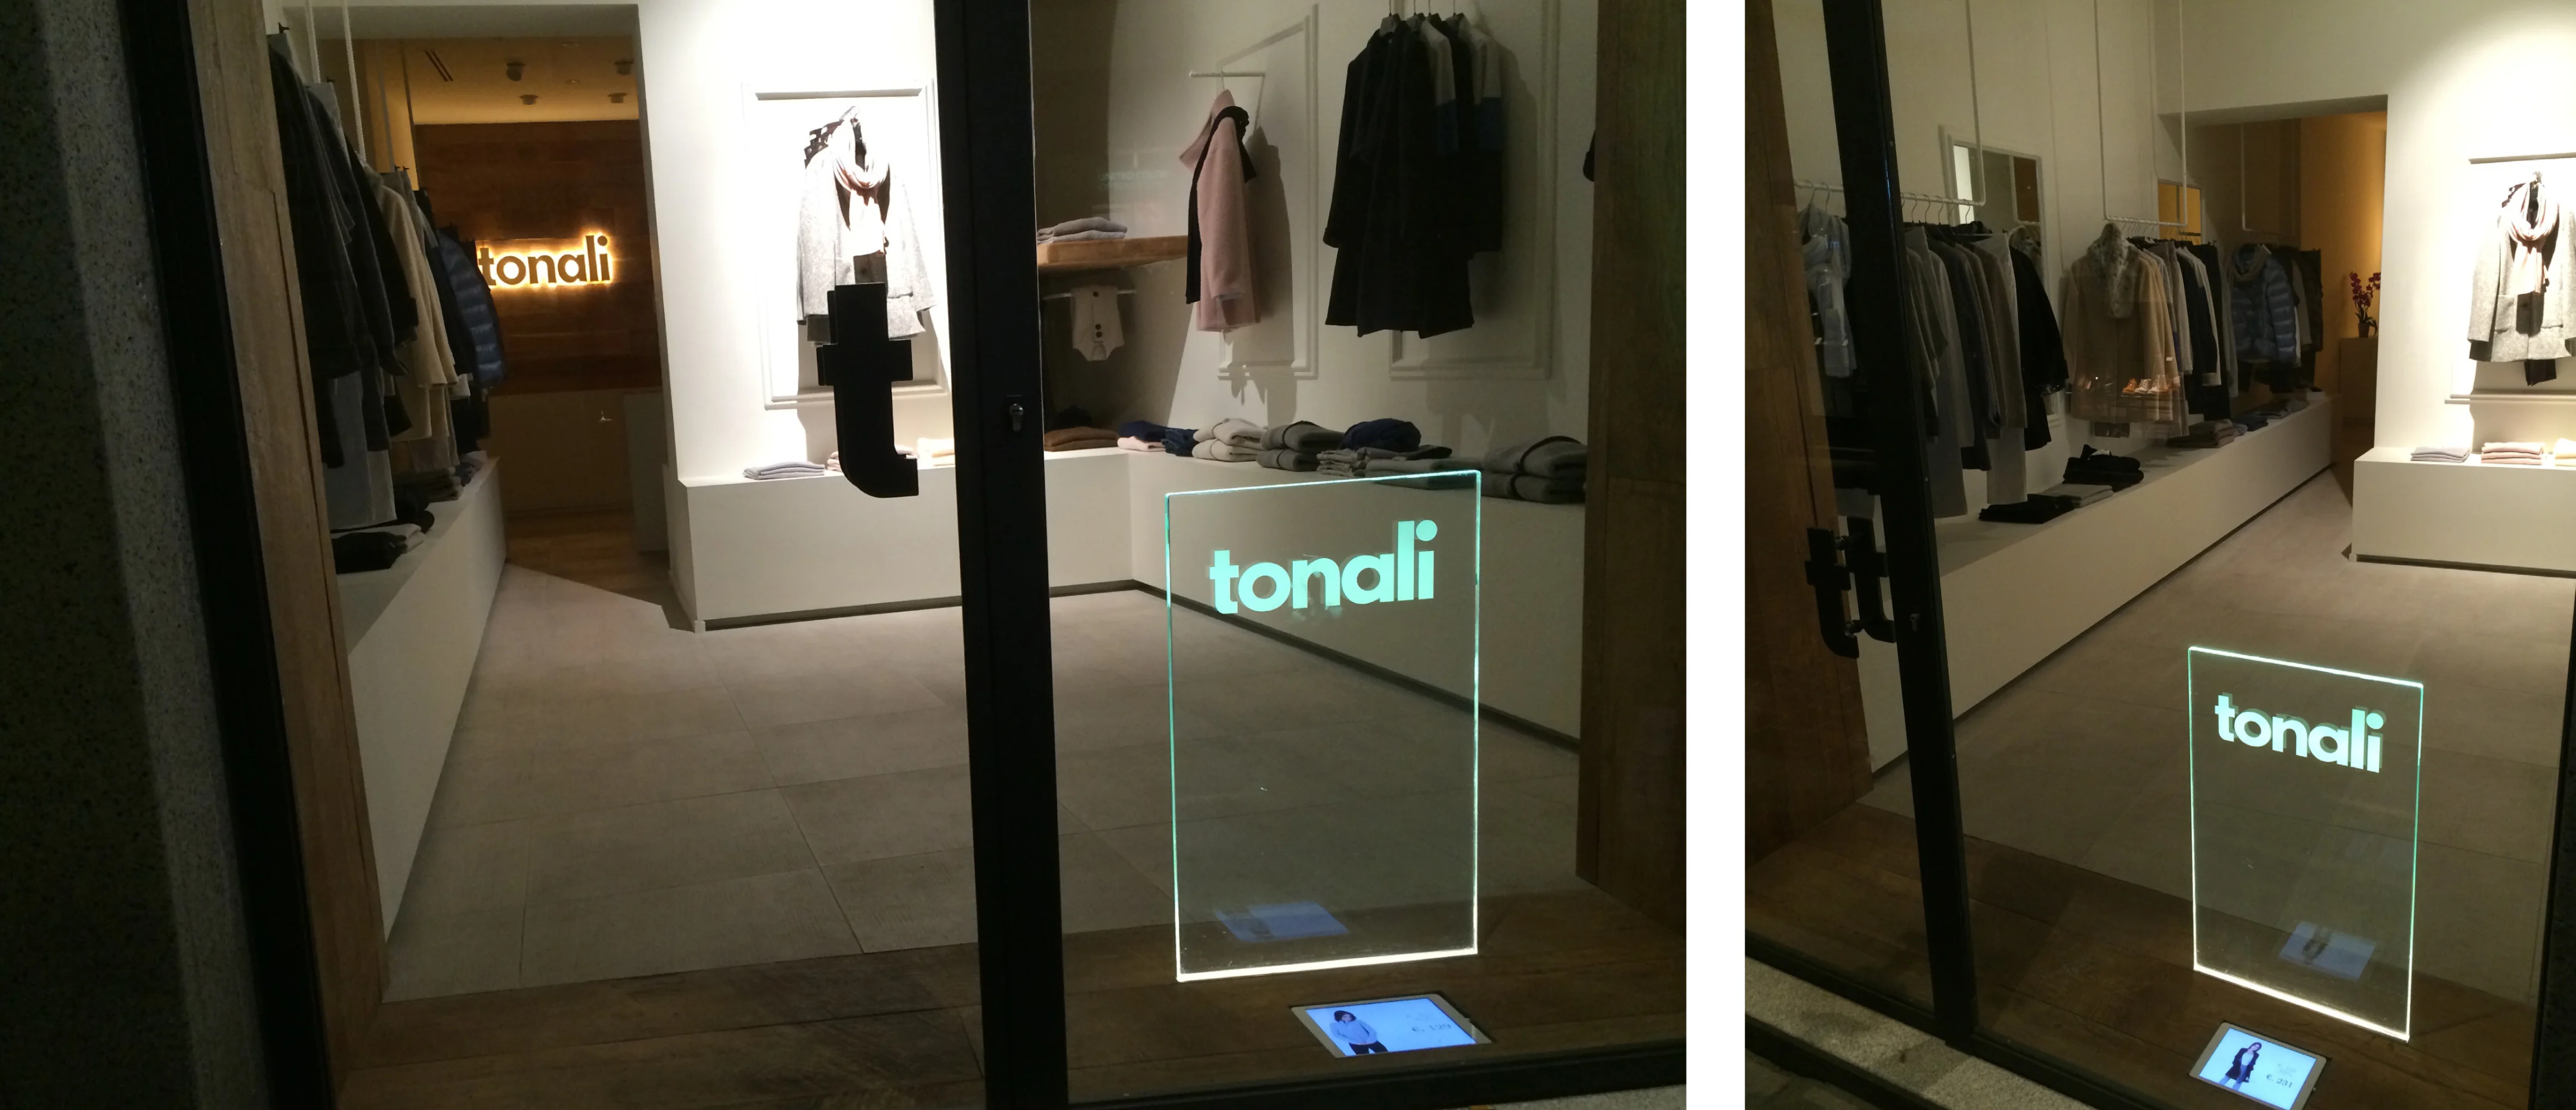 Boutique Tonali in Italy, europe | Clothes - Country Helper